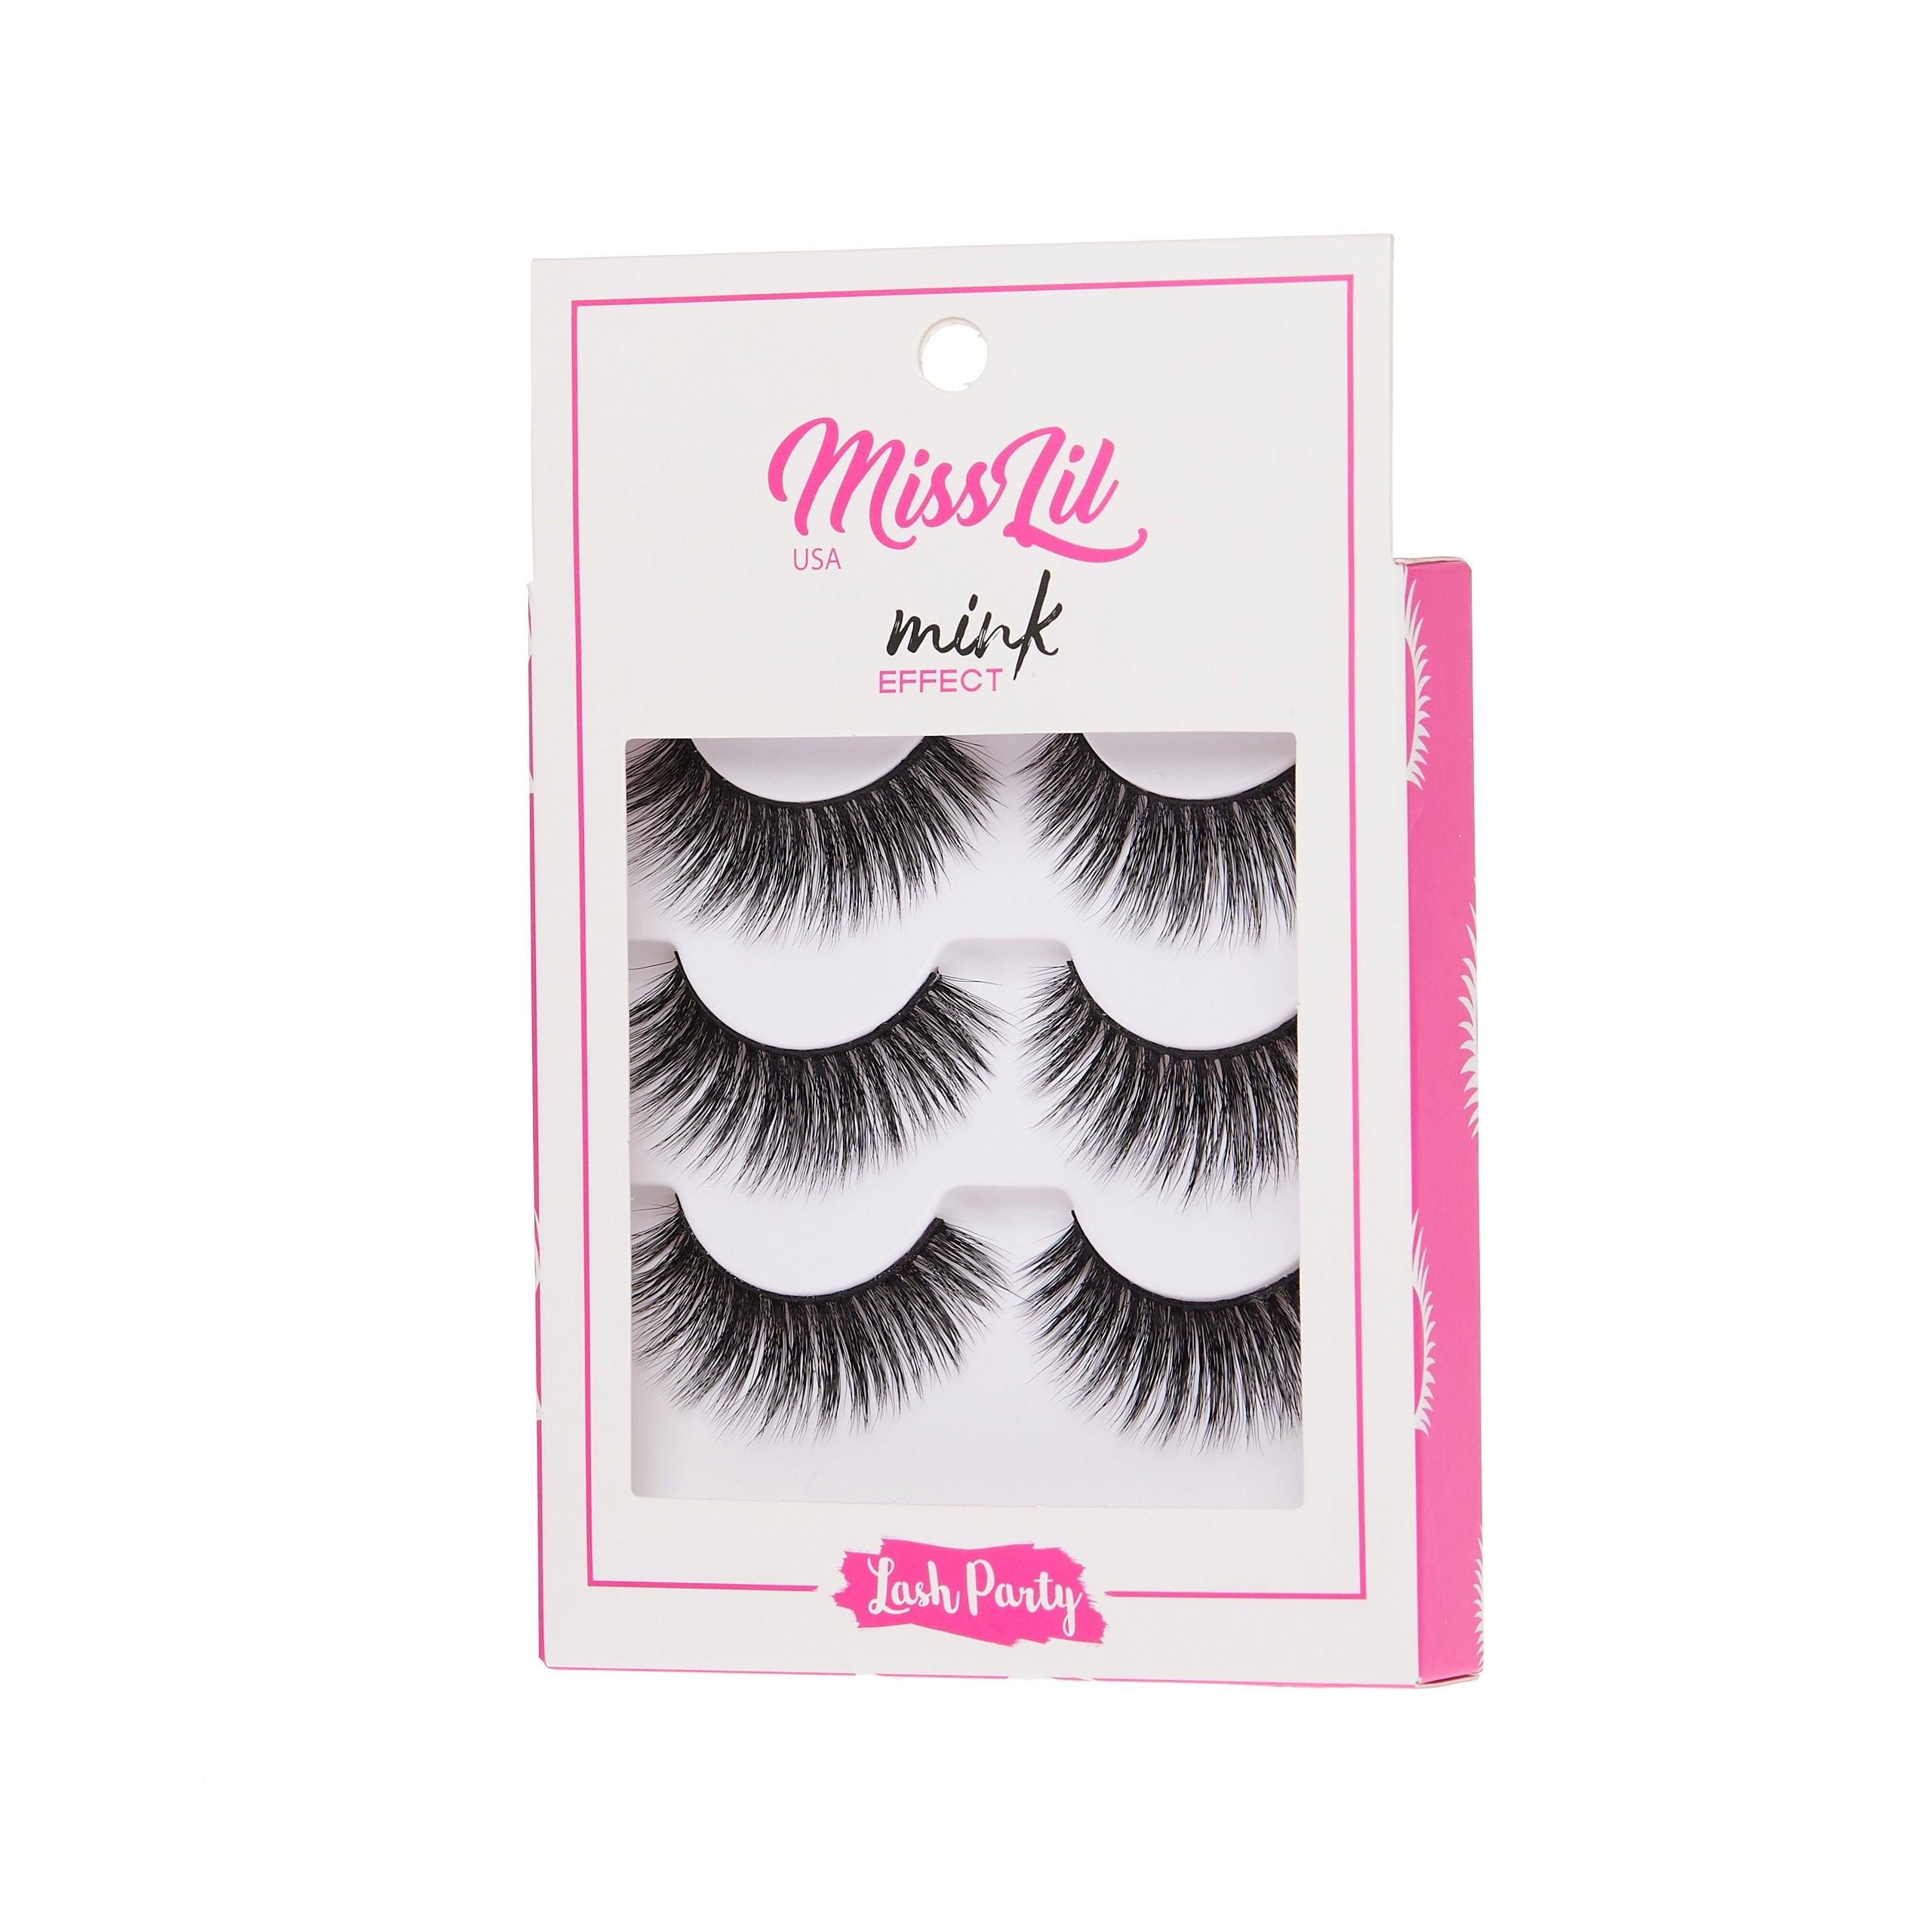 3-Pair Faux Mink Effect Eyelashes - Lash Party Collection #10 - Pack of 3 - Miss Lil USA